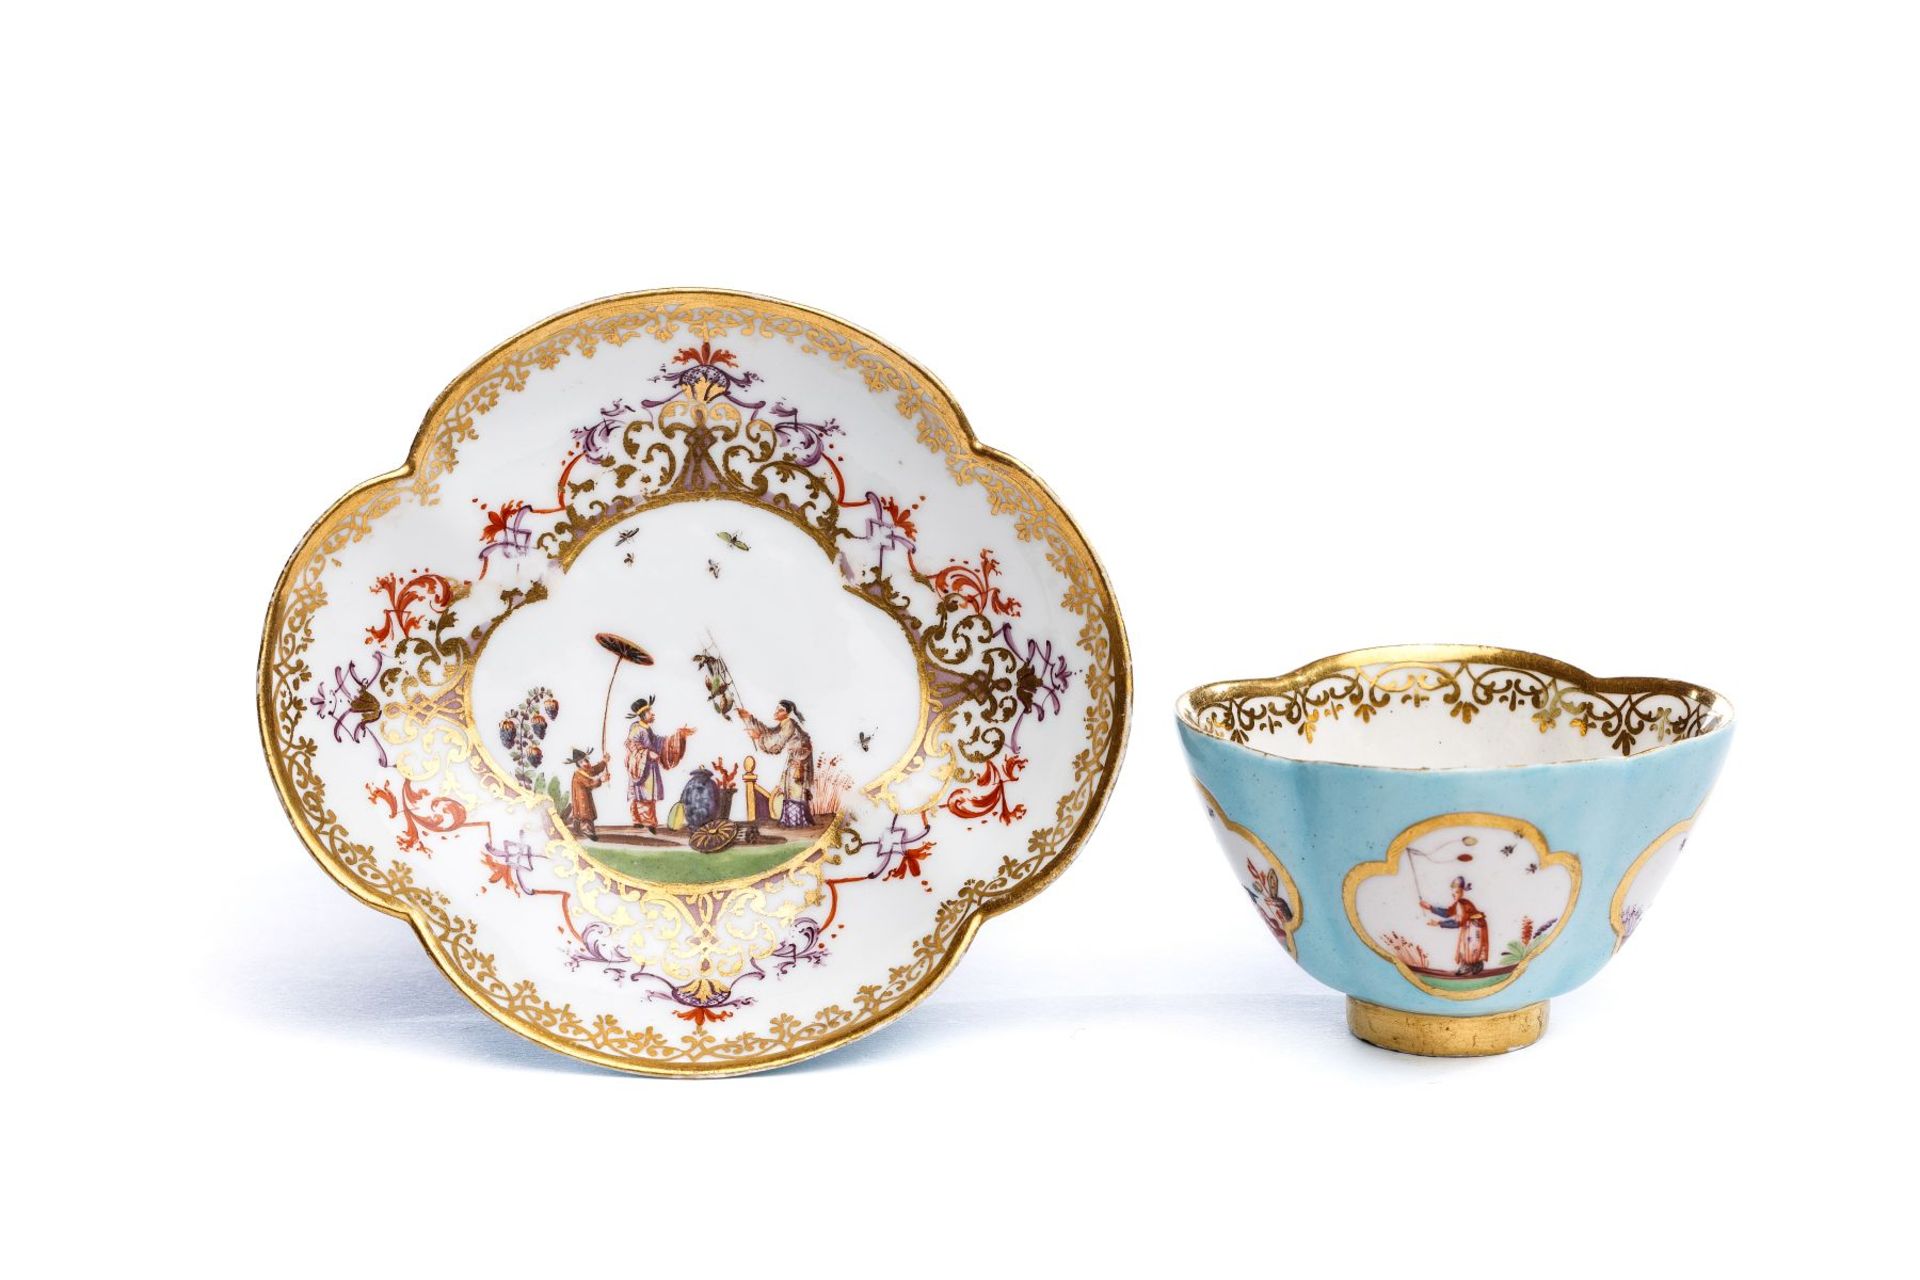 Bowl with saucer, Meissen 1720/30